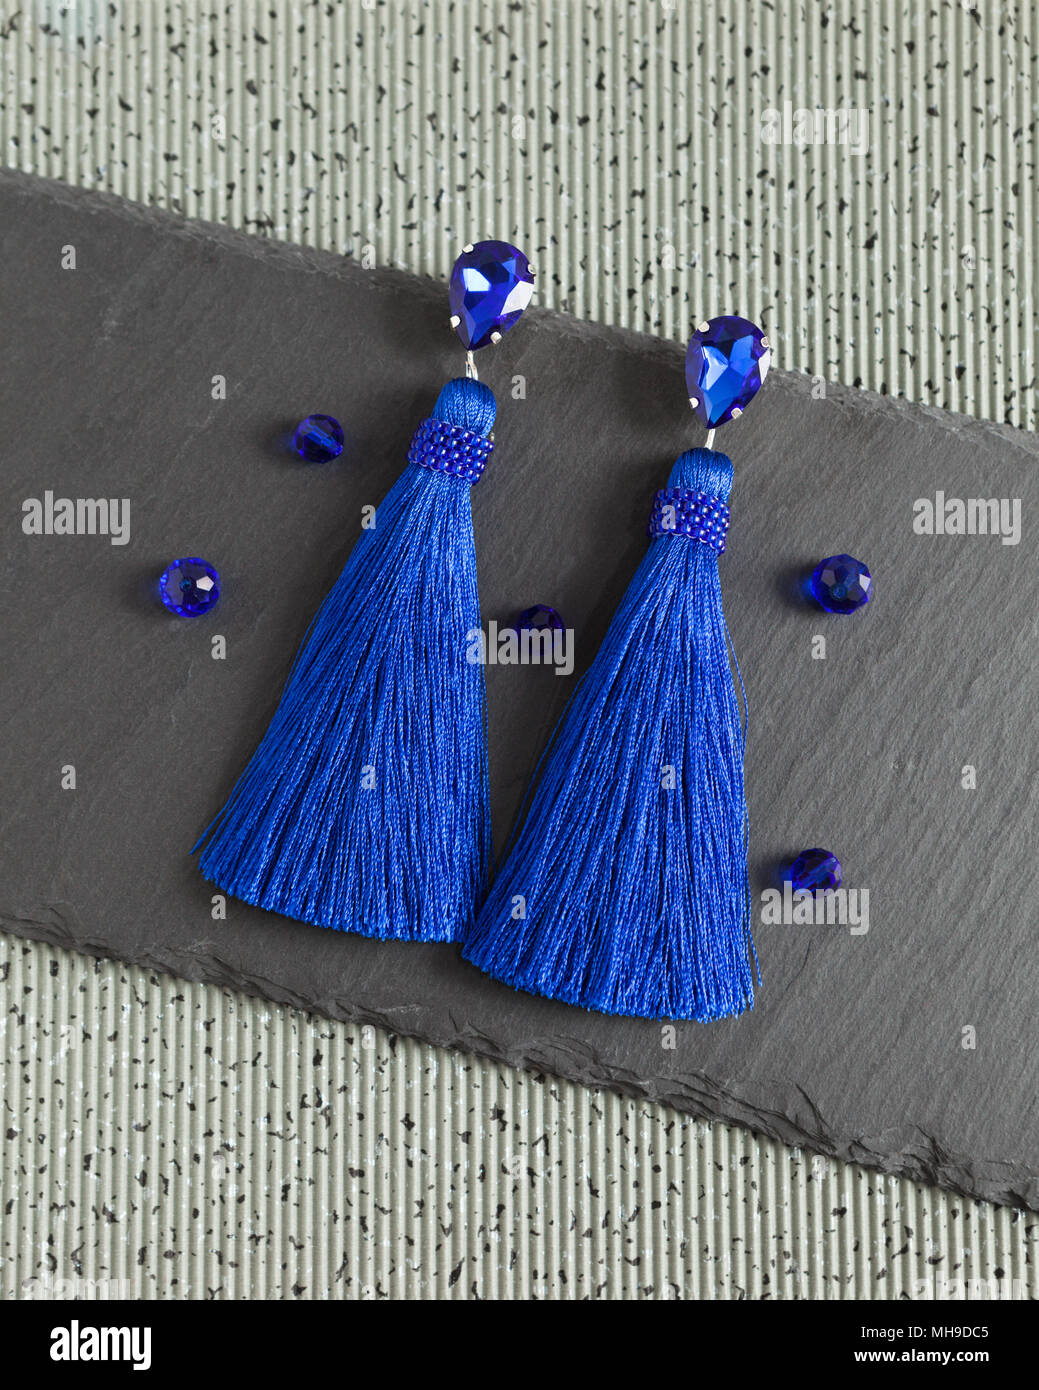 Blue beautiful handmade earrings with shiny crystals and tassels, lying flat on the grey stone background, top view Stock Photo